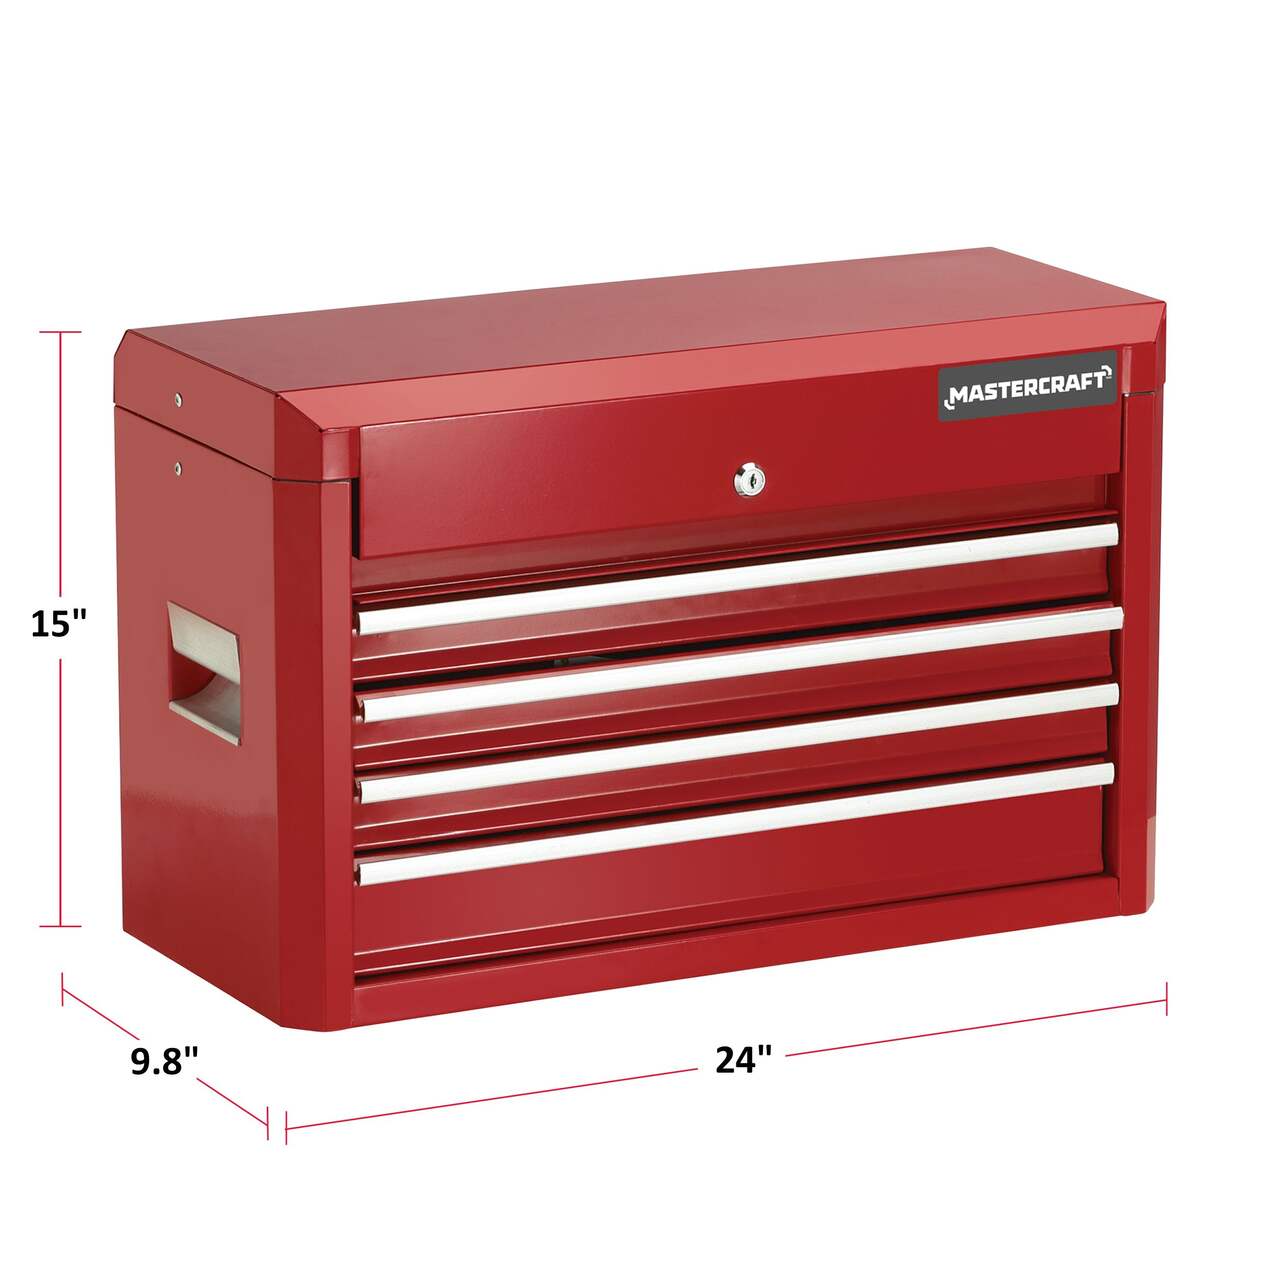 Mastercraft Tool Chest with 4 Drawers, Deep Red, 24-in